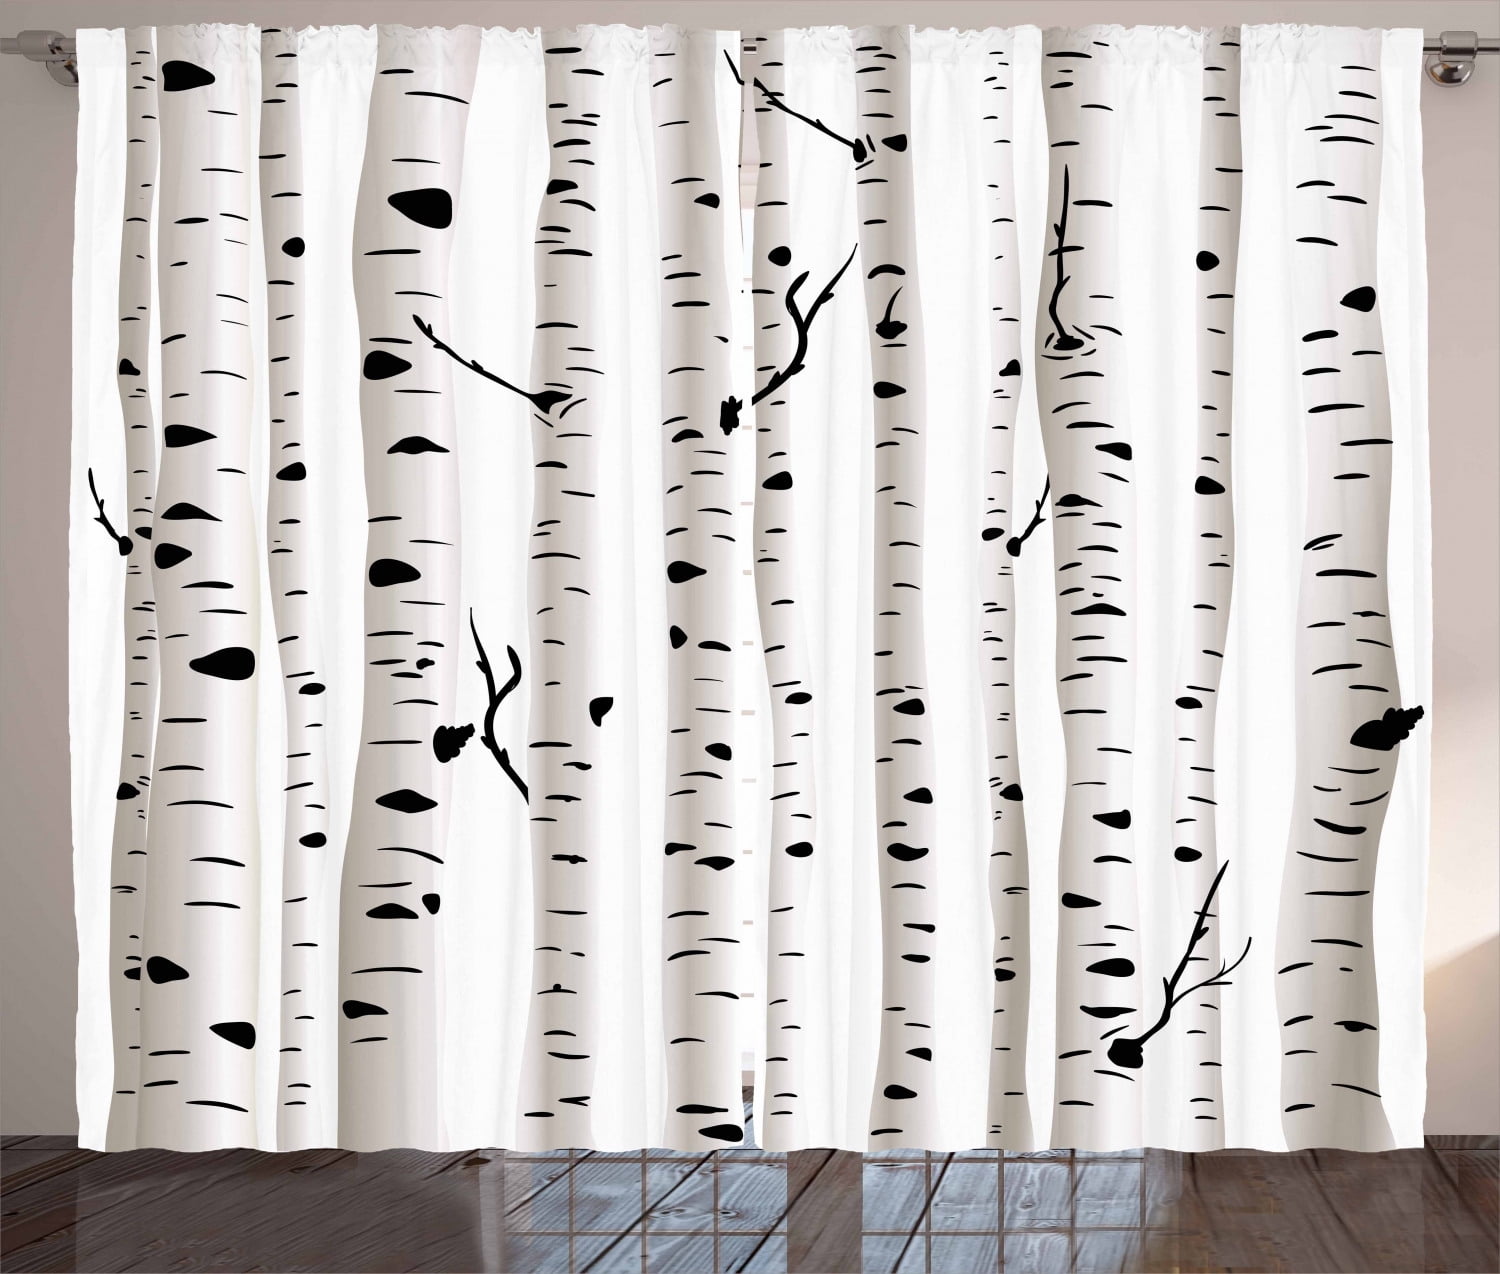 3 COLOURS METALLIC PRINTED TREES BIRCH EXCELLENT QUALITY WOVEN VOILE PANEL 